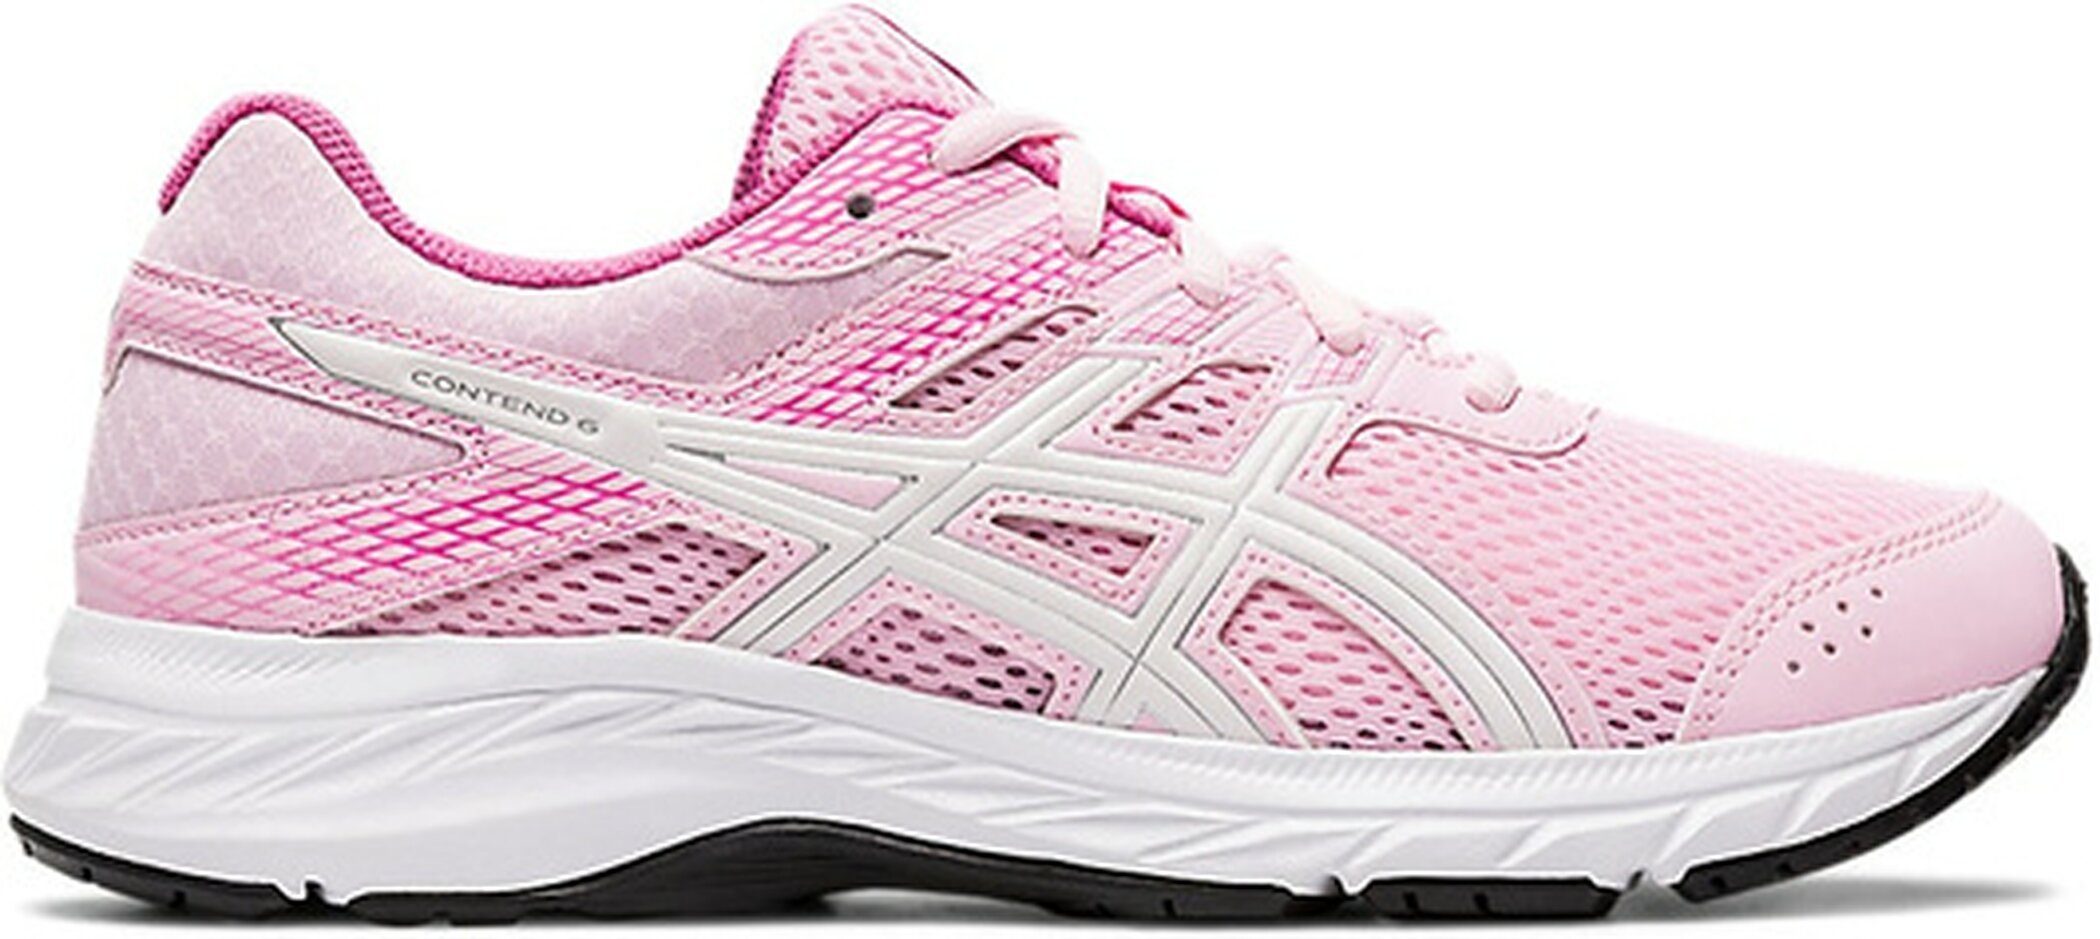 Laufschuh CAMEO/ROSELLE 6 GS PINK Asics CONTEND